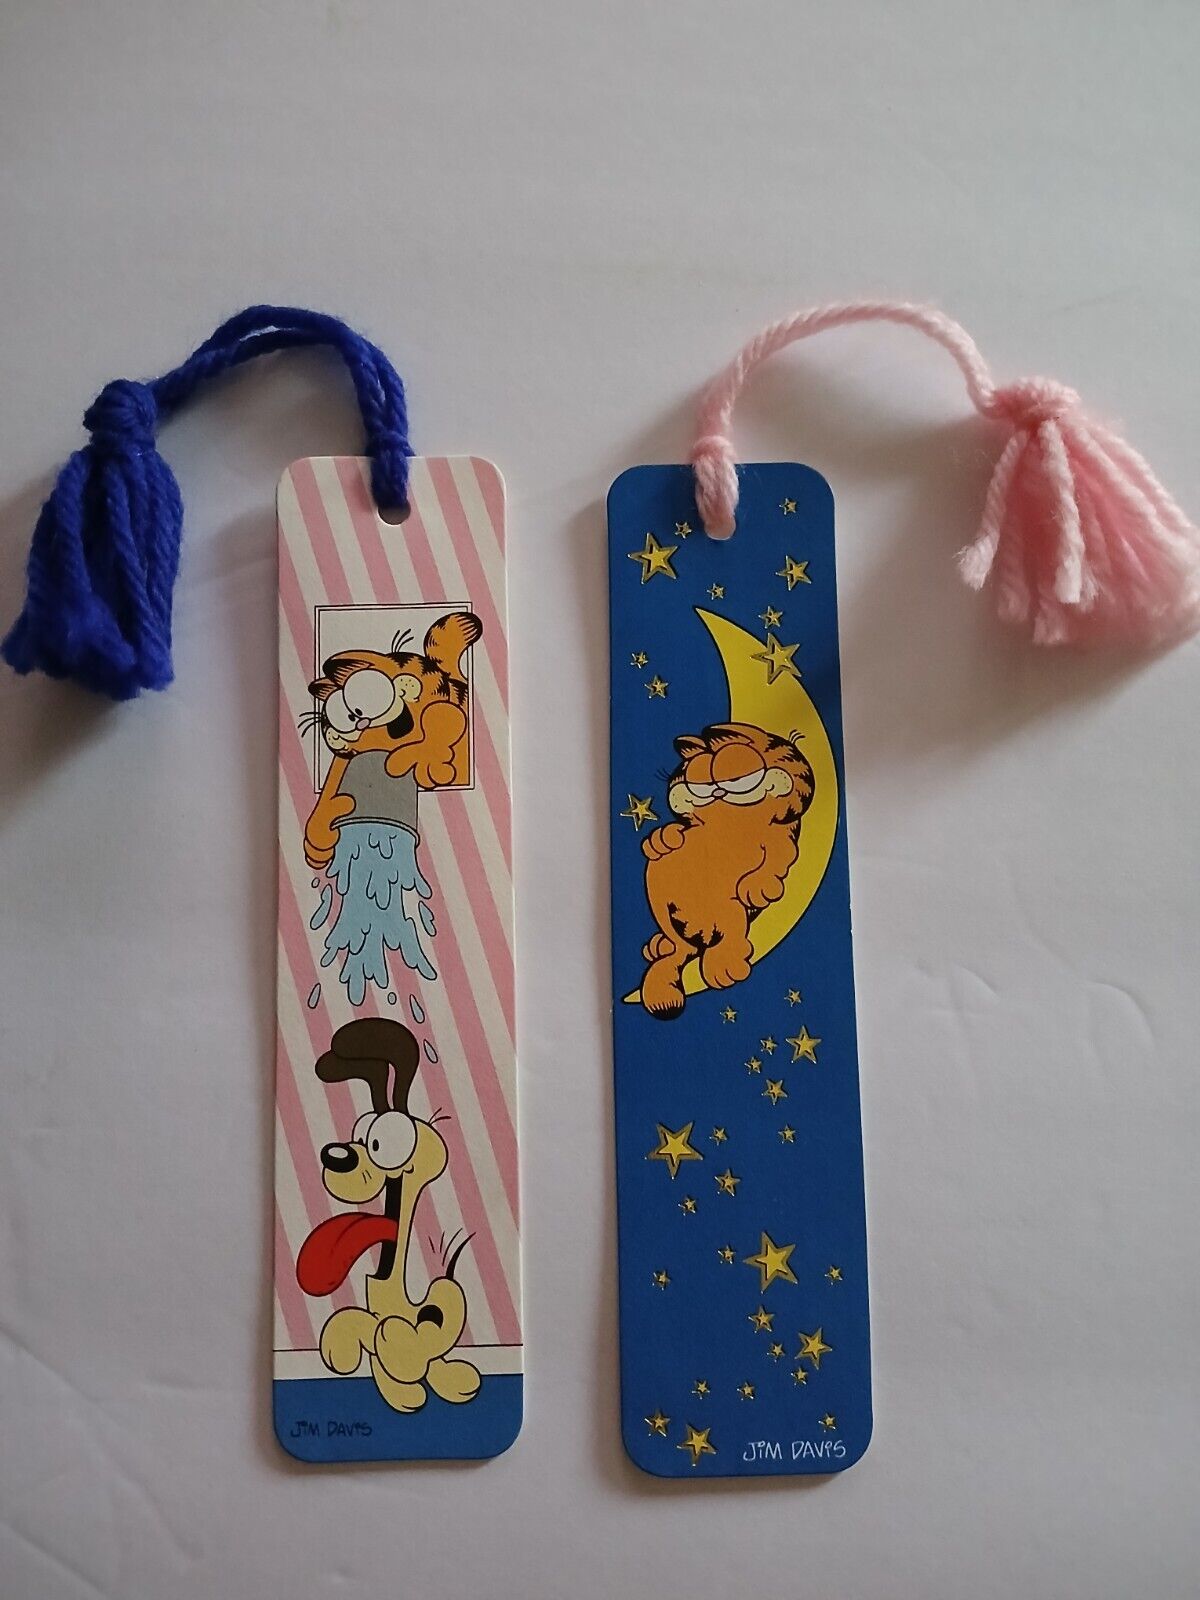 2 Vintage GARFIELD BOOKMARKS BRAND NEW GRAPHICS GREAT.